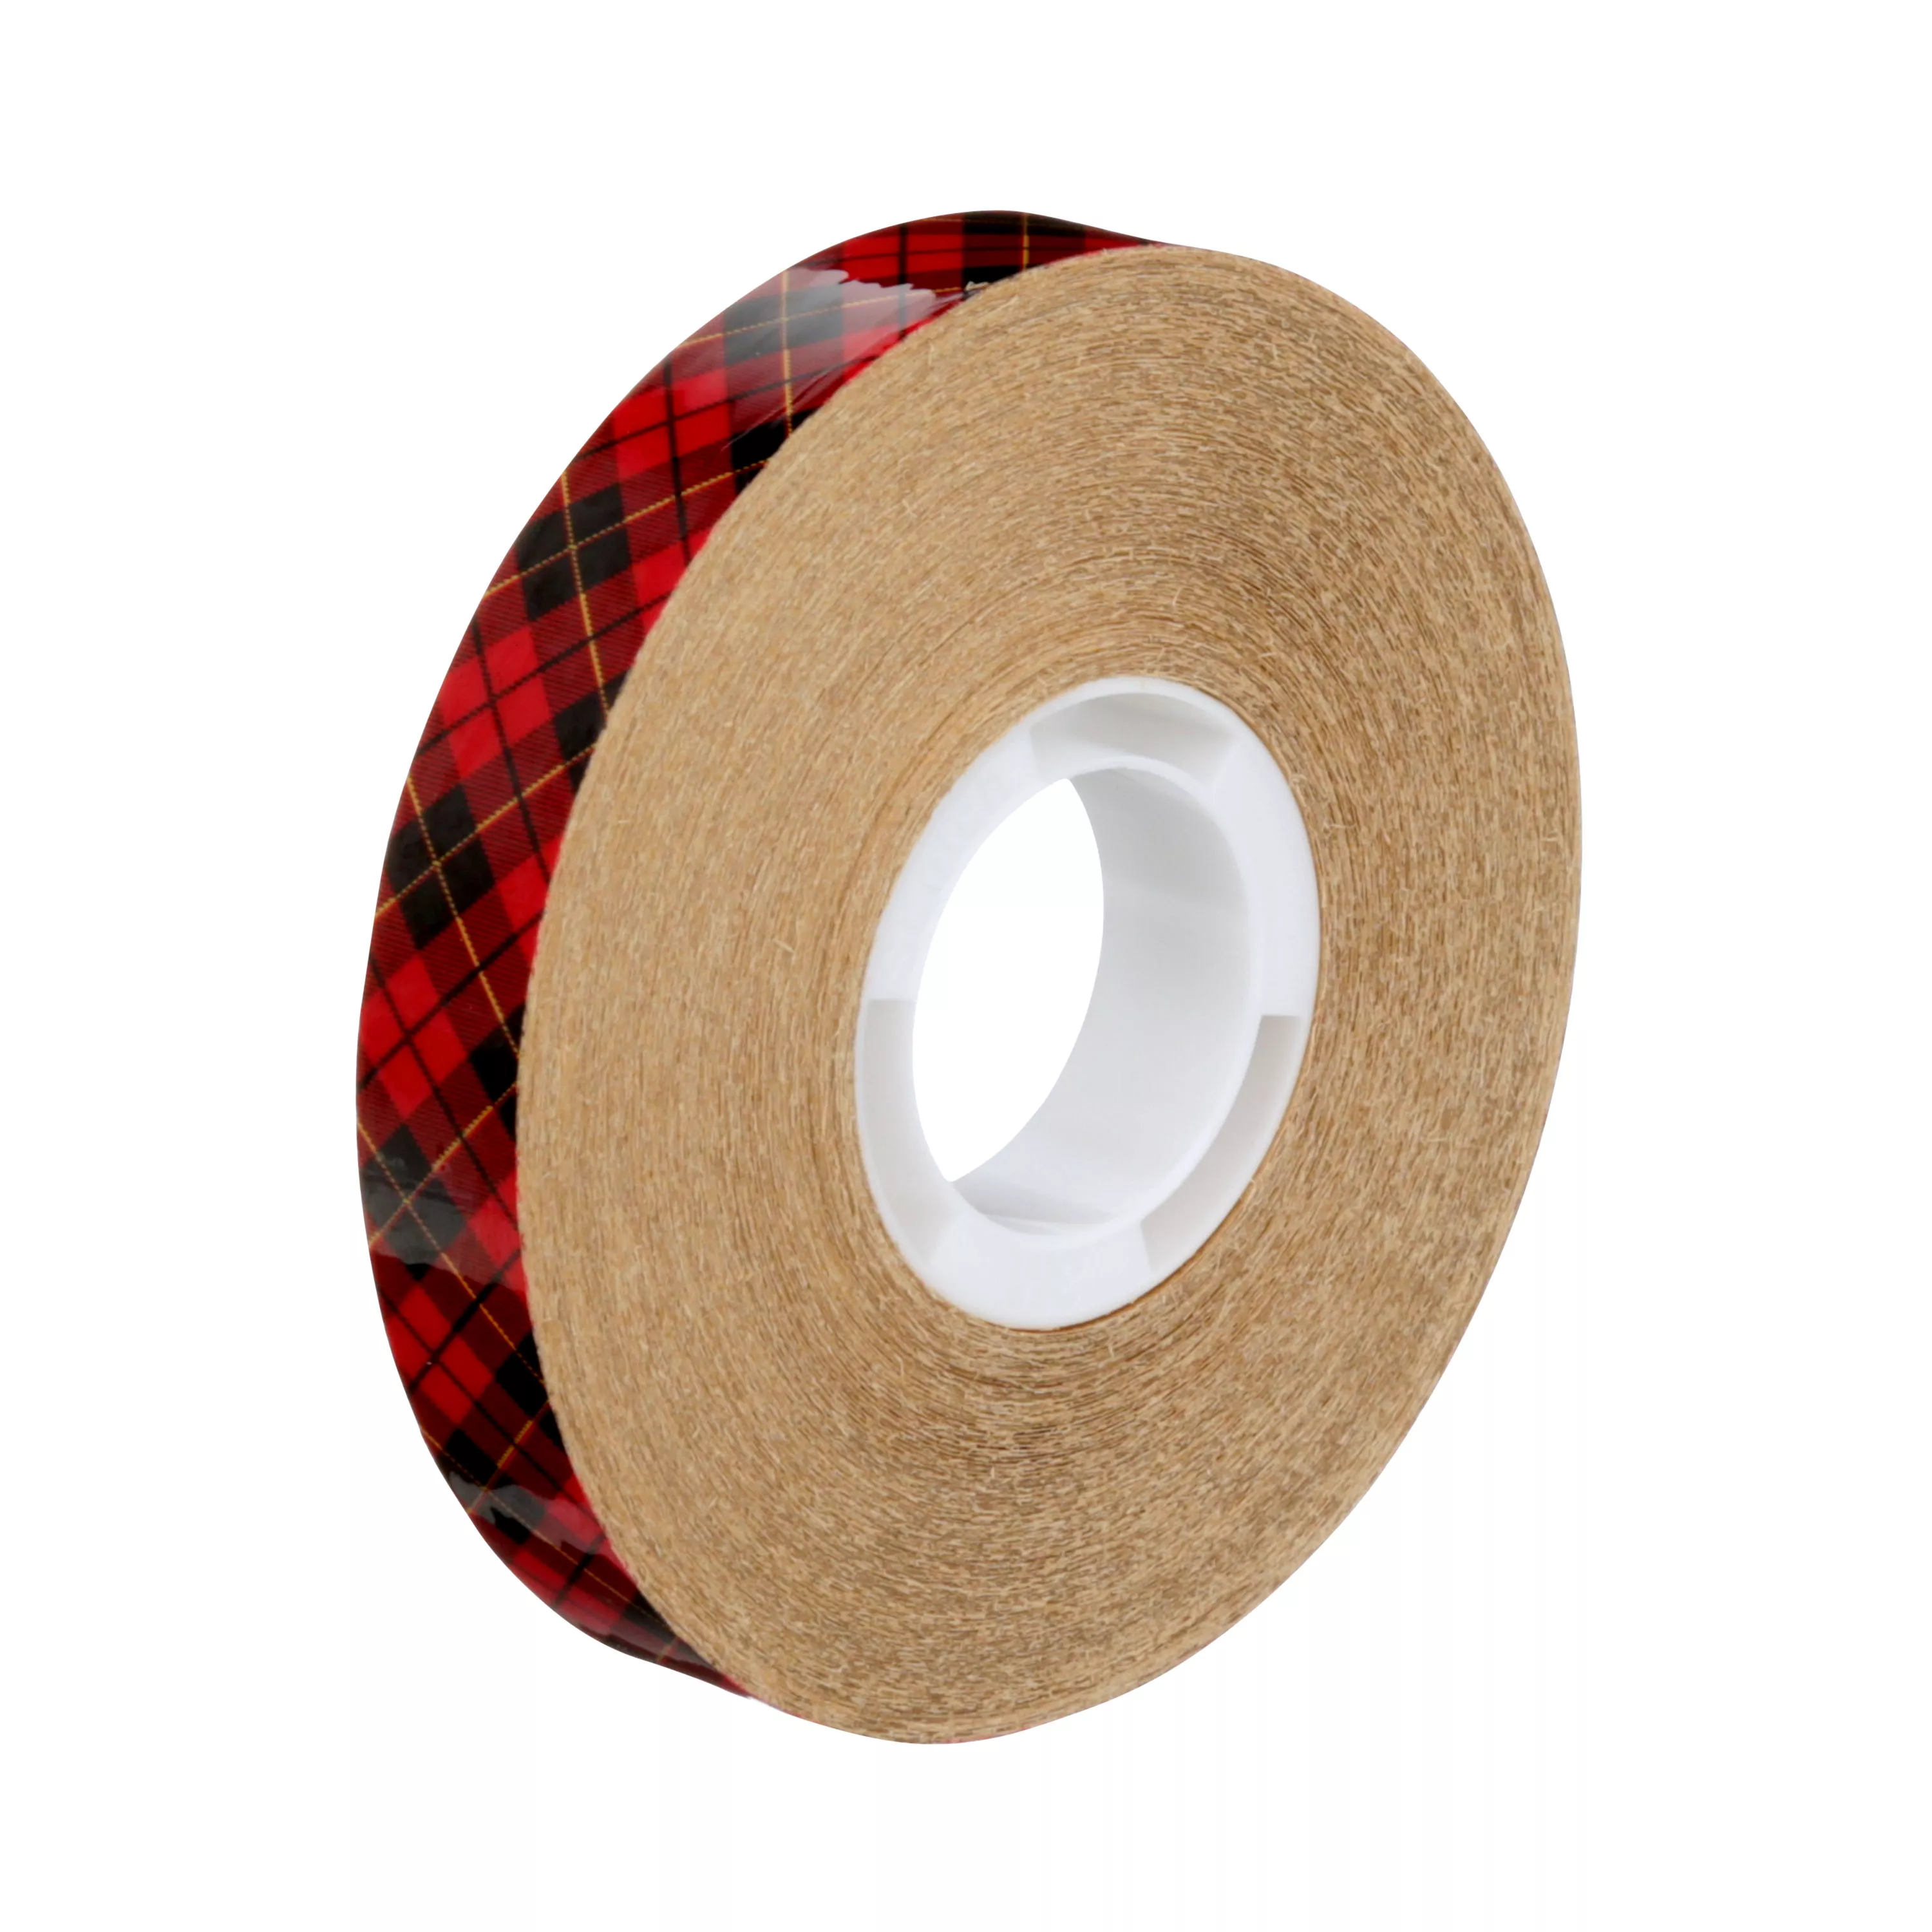 Scotch® ATG Adhesive Transfer Tape 924, Clear, 1/2 in x 36 yd, 2 mil, 72
Roll/Case